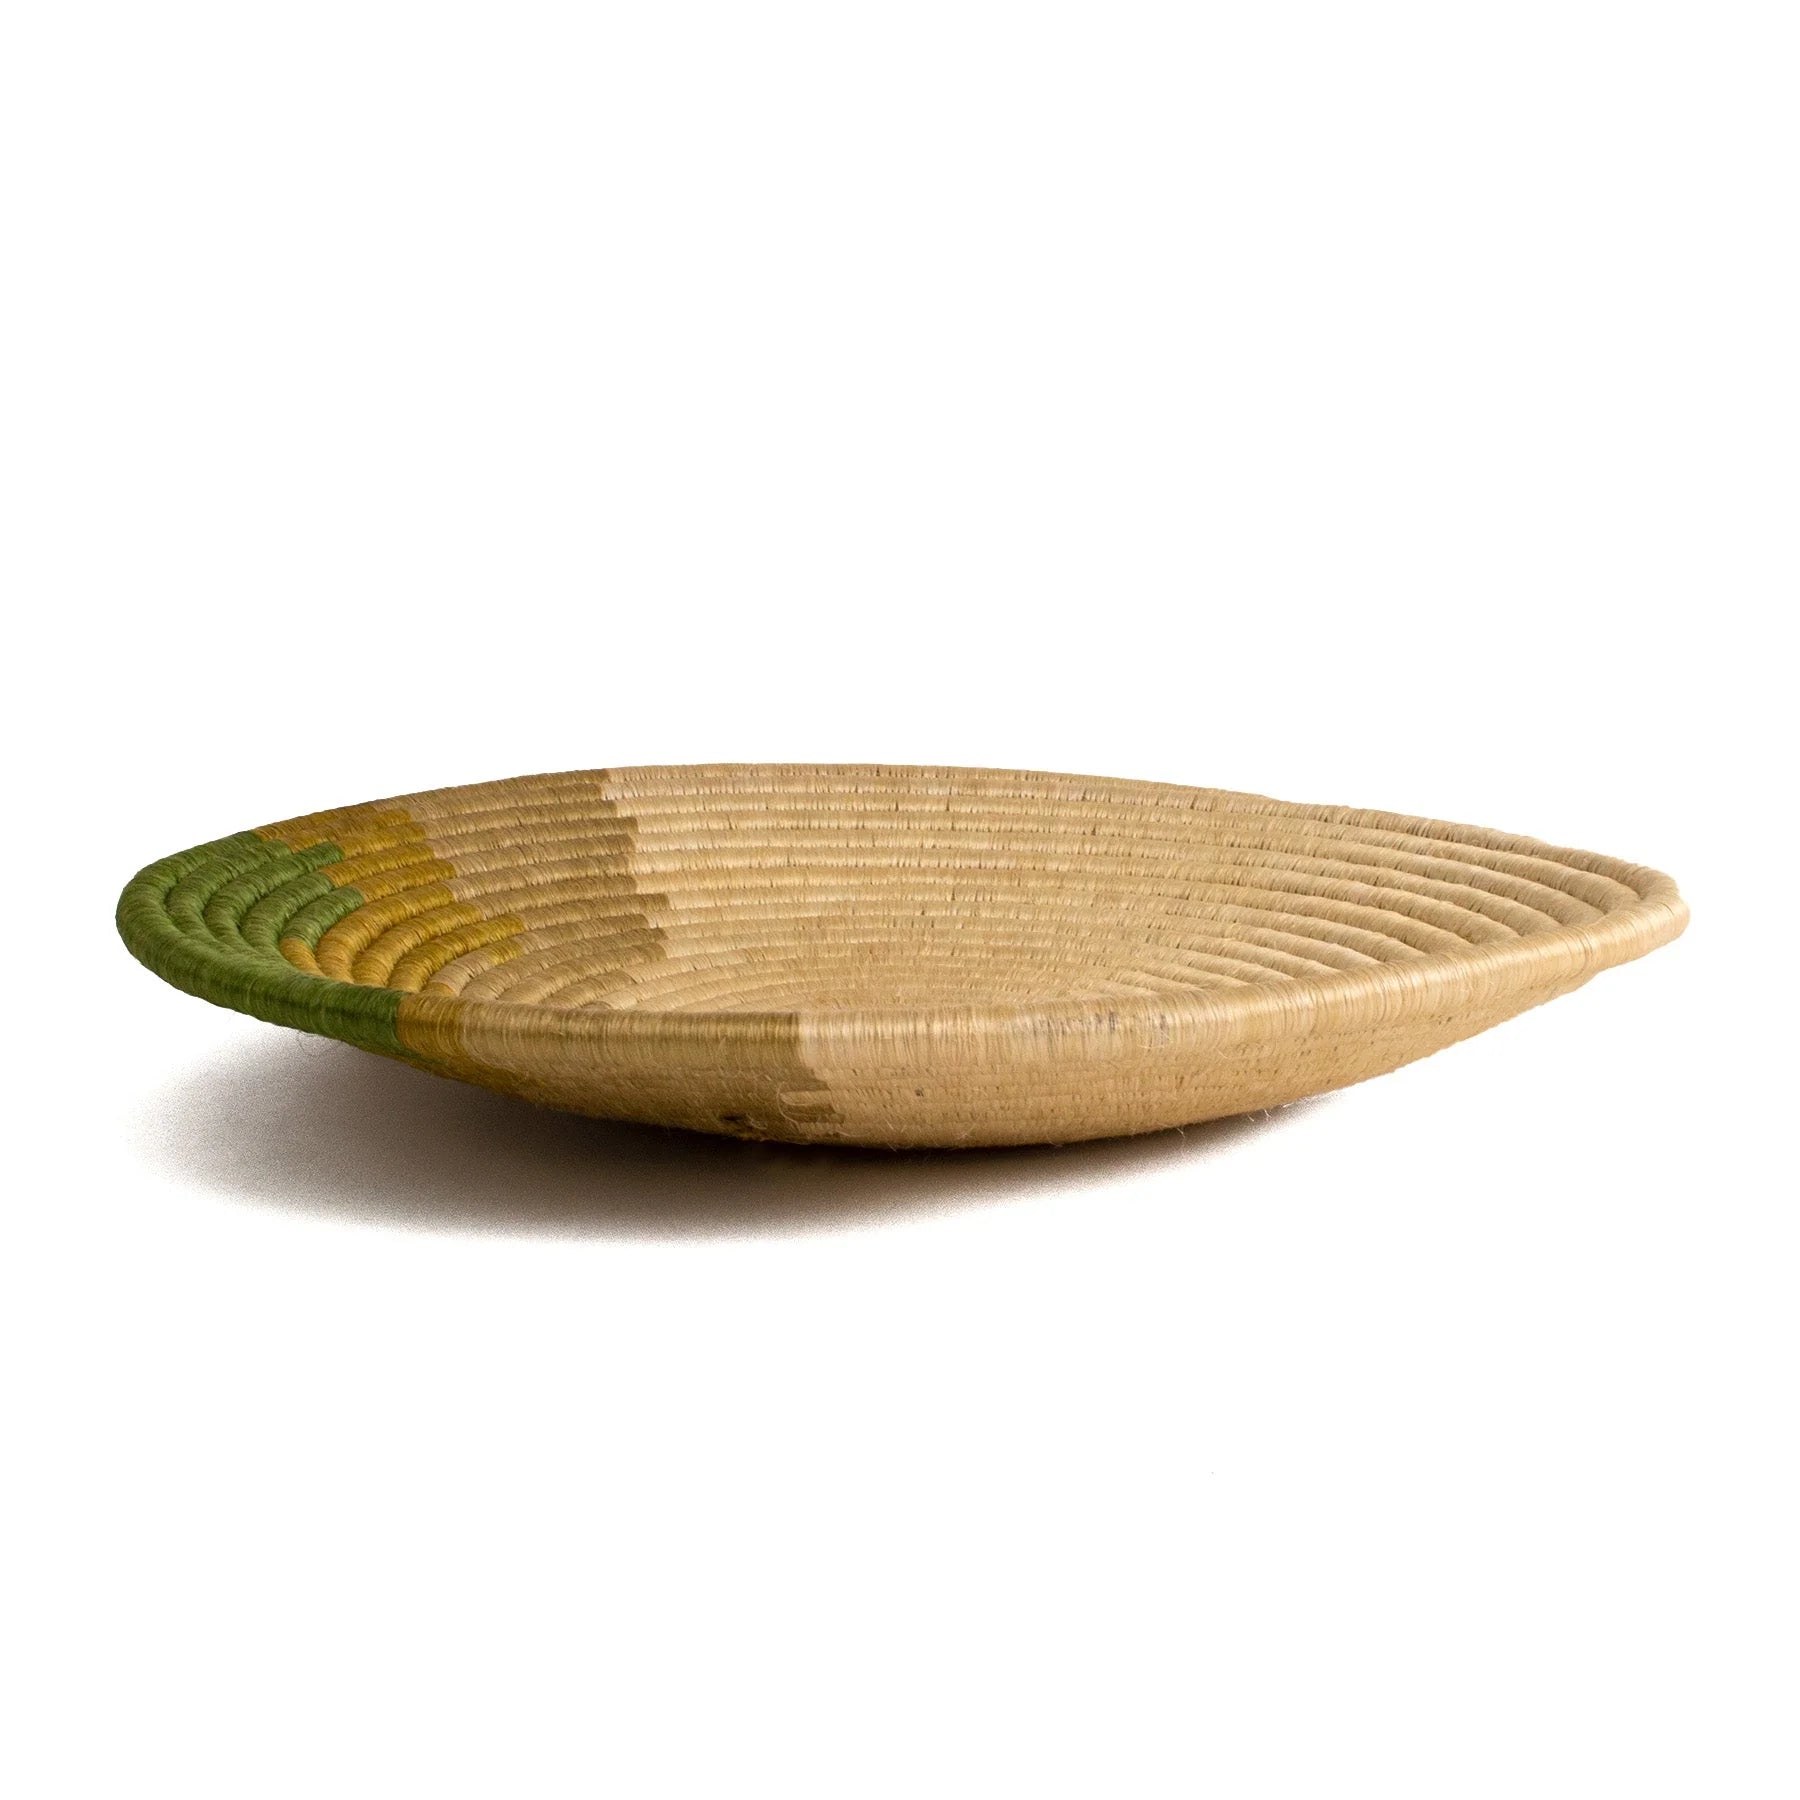 A Restorative Woven Bowl 21" Moss by Kazi Goods, a shallow, oval-shaped woven basket in natural tan color with subtle green accents radiating outward from the center is showcased against a plain white background. This piece reflects the tranquil aesthetic of a Scottsdale Arizona bungalow.